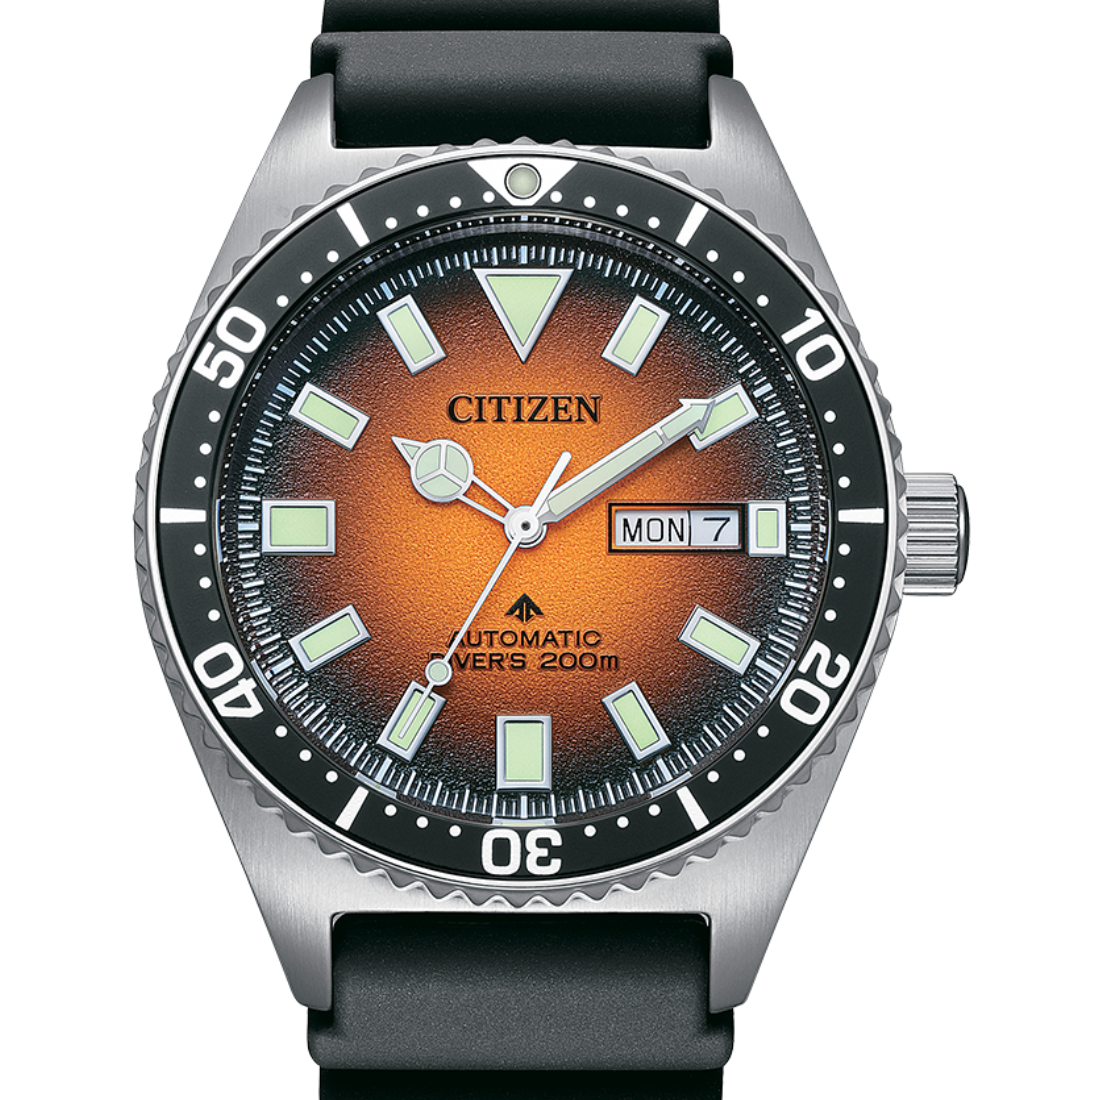 Citizen NY0120-01Z Promaster Marine Divers 200m Watch